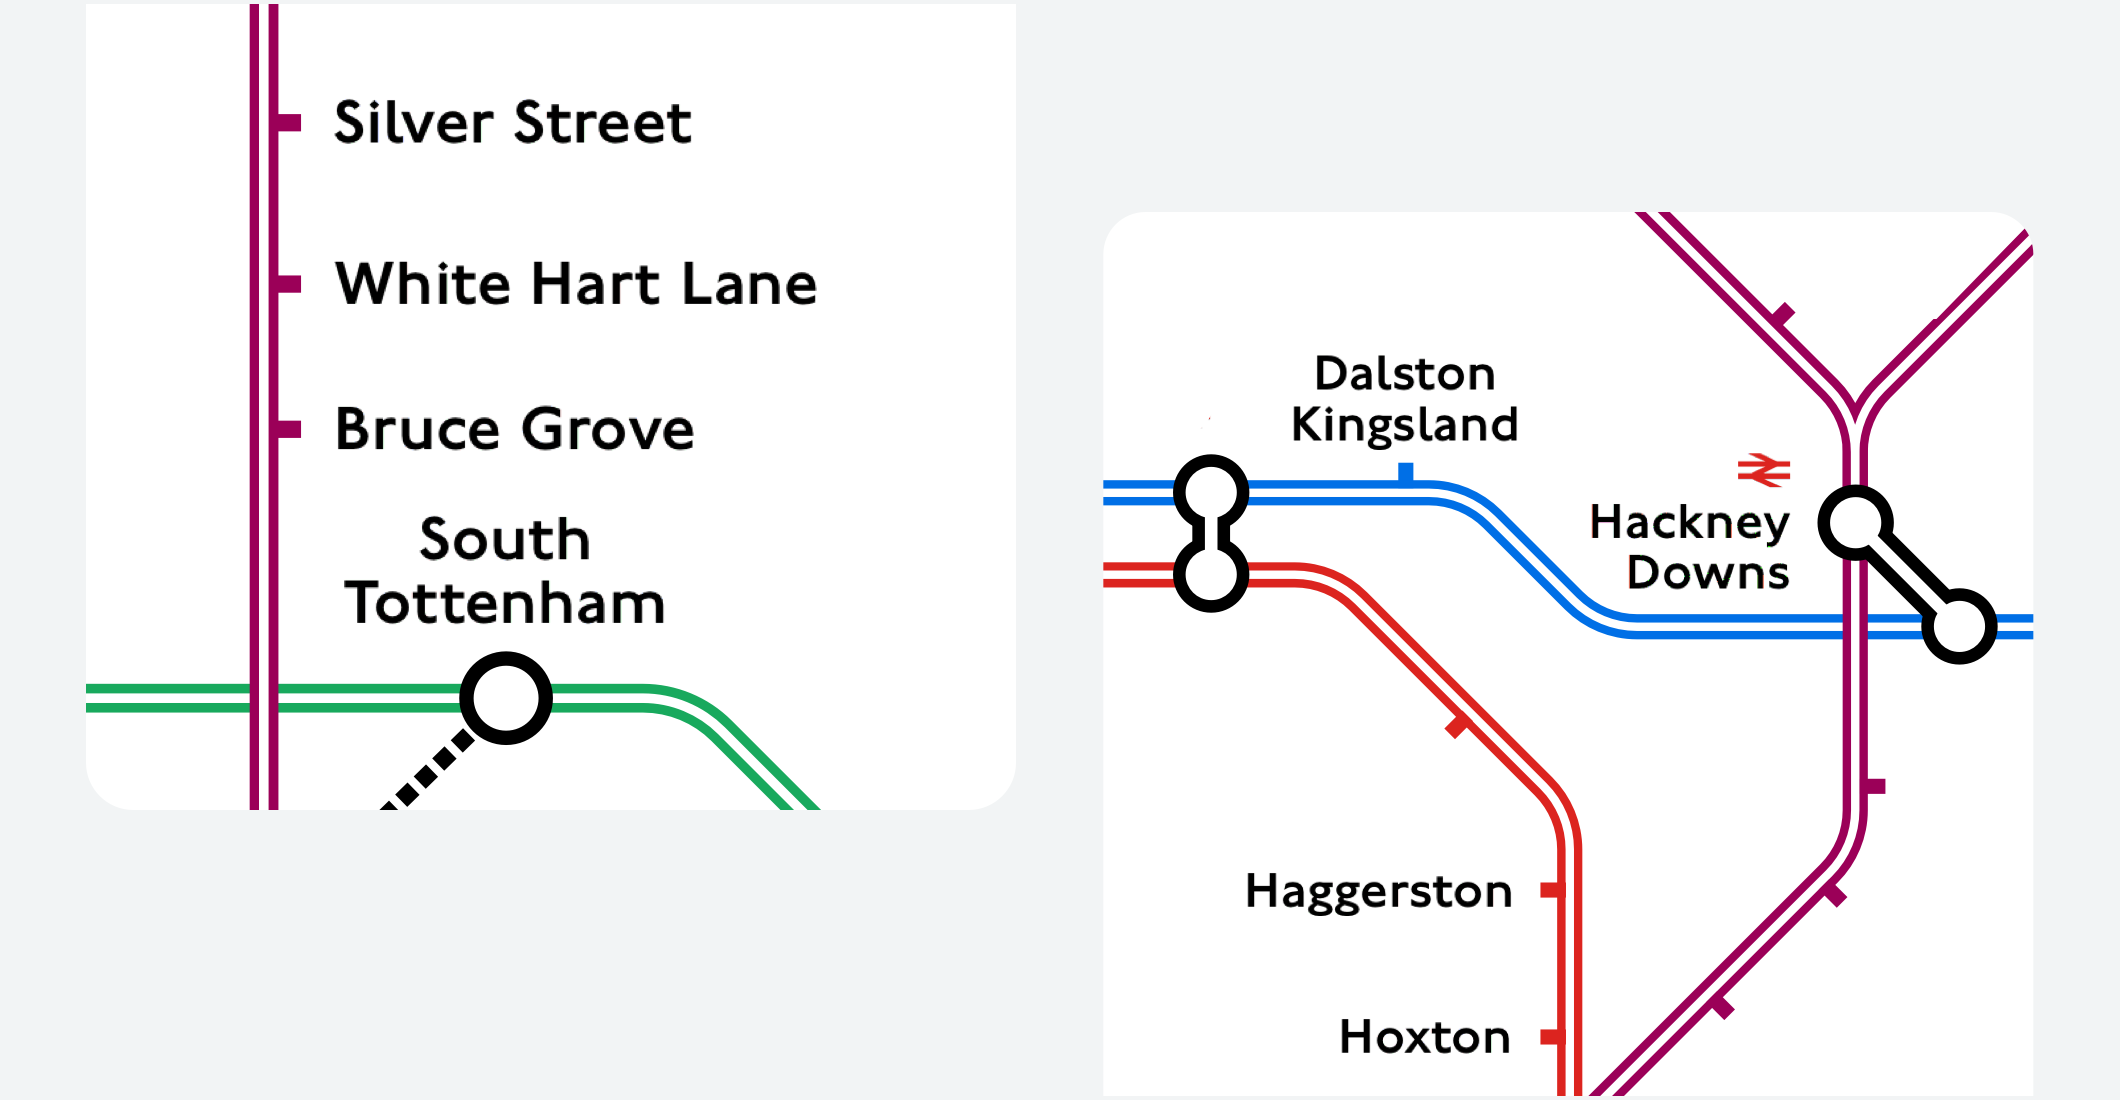 Two diagrammatic maps showing sections of the London Overground lines. One of these shows a section of the Weaver line and a section of the Suffragette line. The other one shows a segment of the Weaver line, a segment of the Mildmay line, and a section of the Windrush line. Both examples display the names of a few stations present in these line segments.